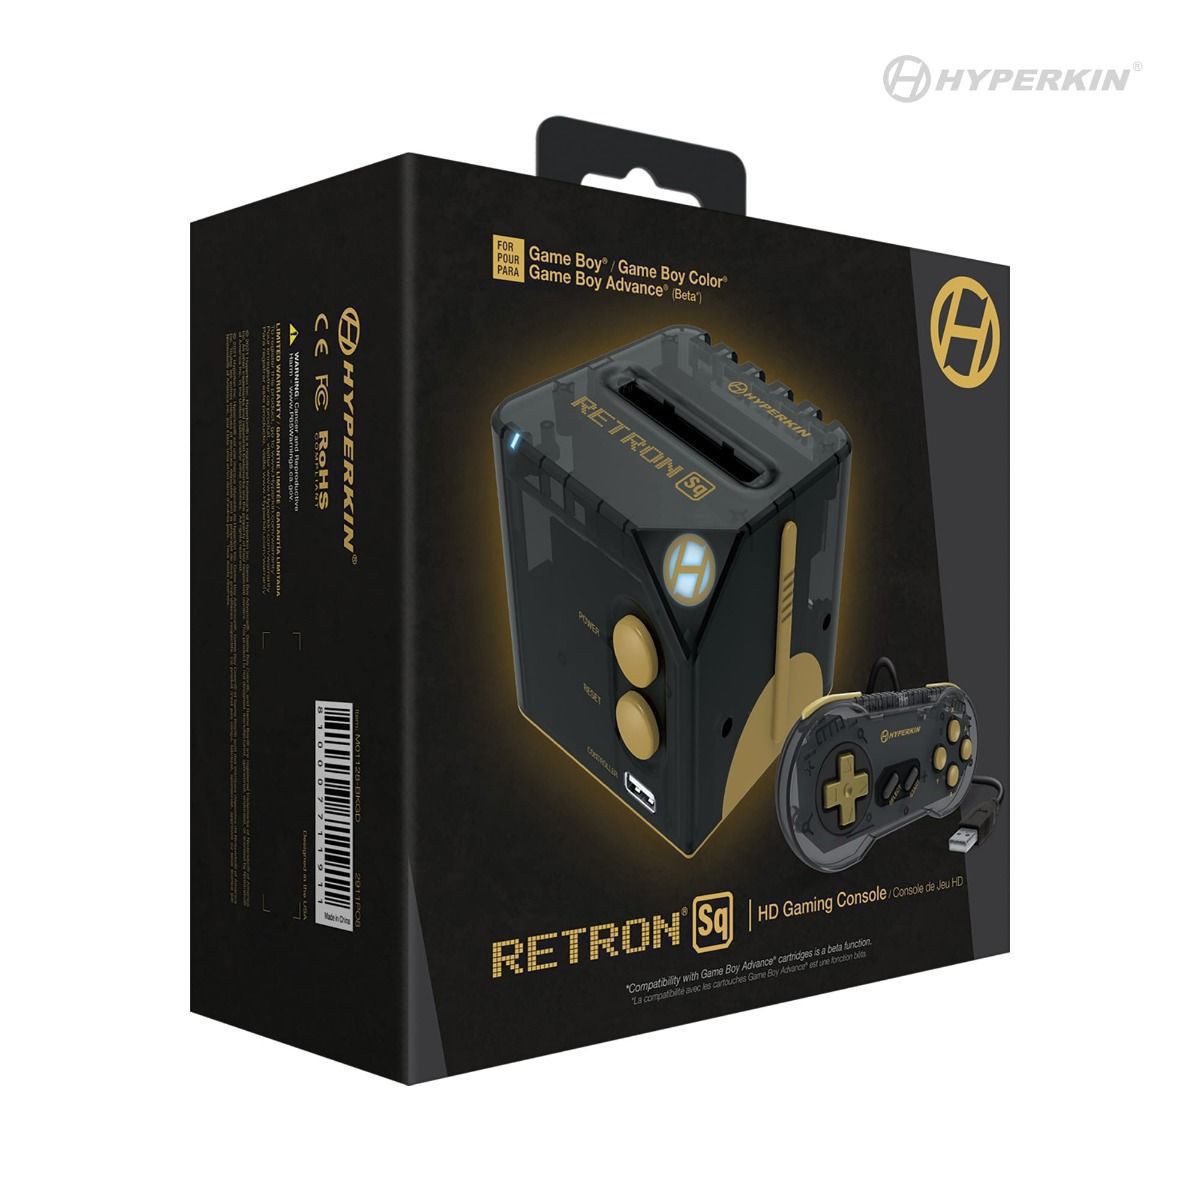 RetroN Sq Gaming Console (HDMI) - Black/Gold - Gameboy Color Hardware